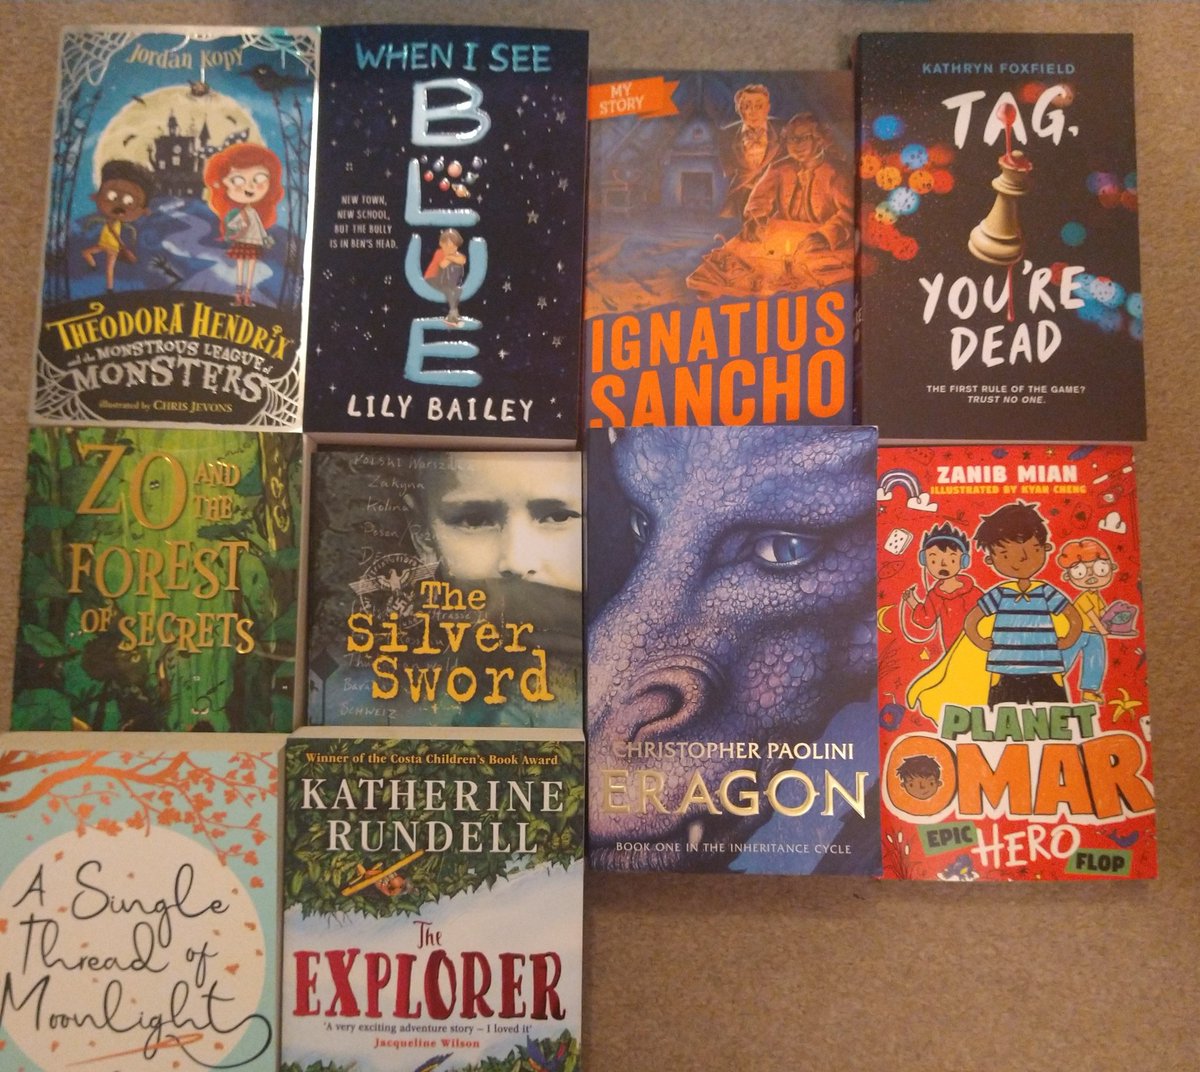 This is what's left. With a few new additions. When I see Blue is only in sale as it has some marks on cover.